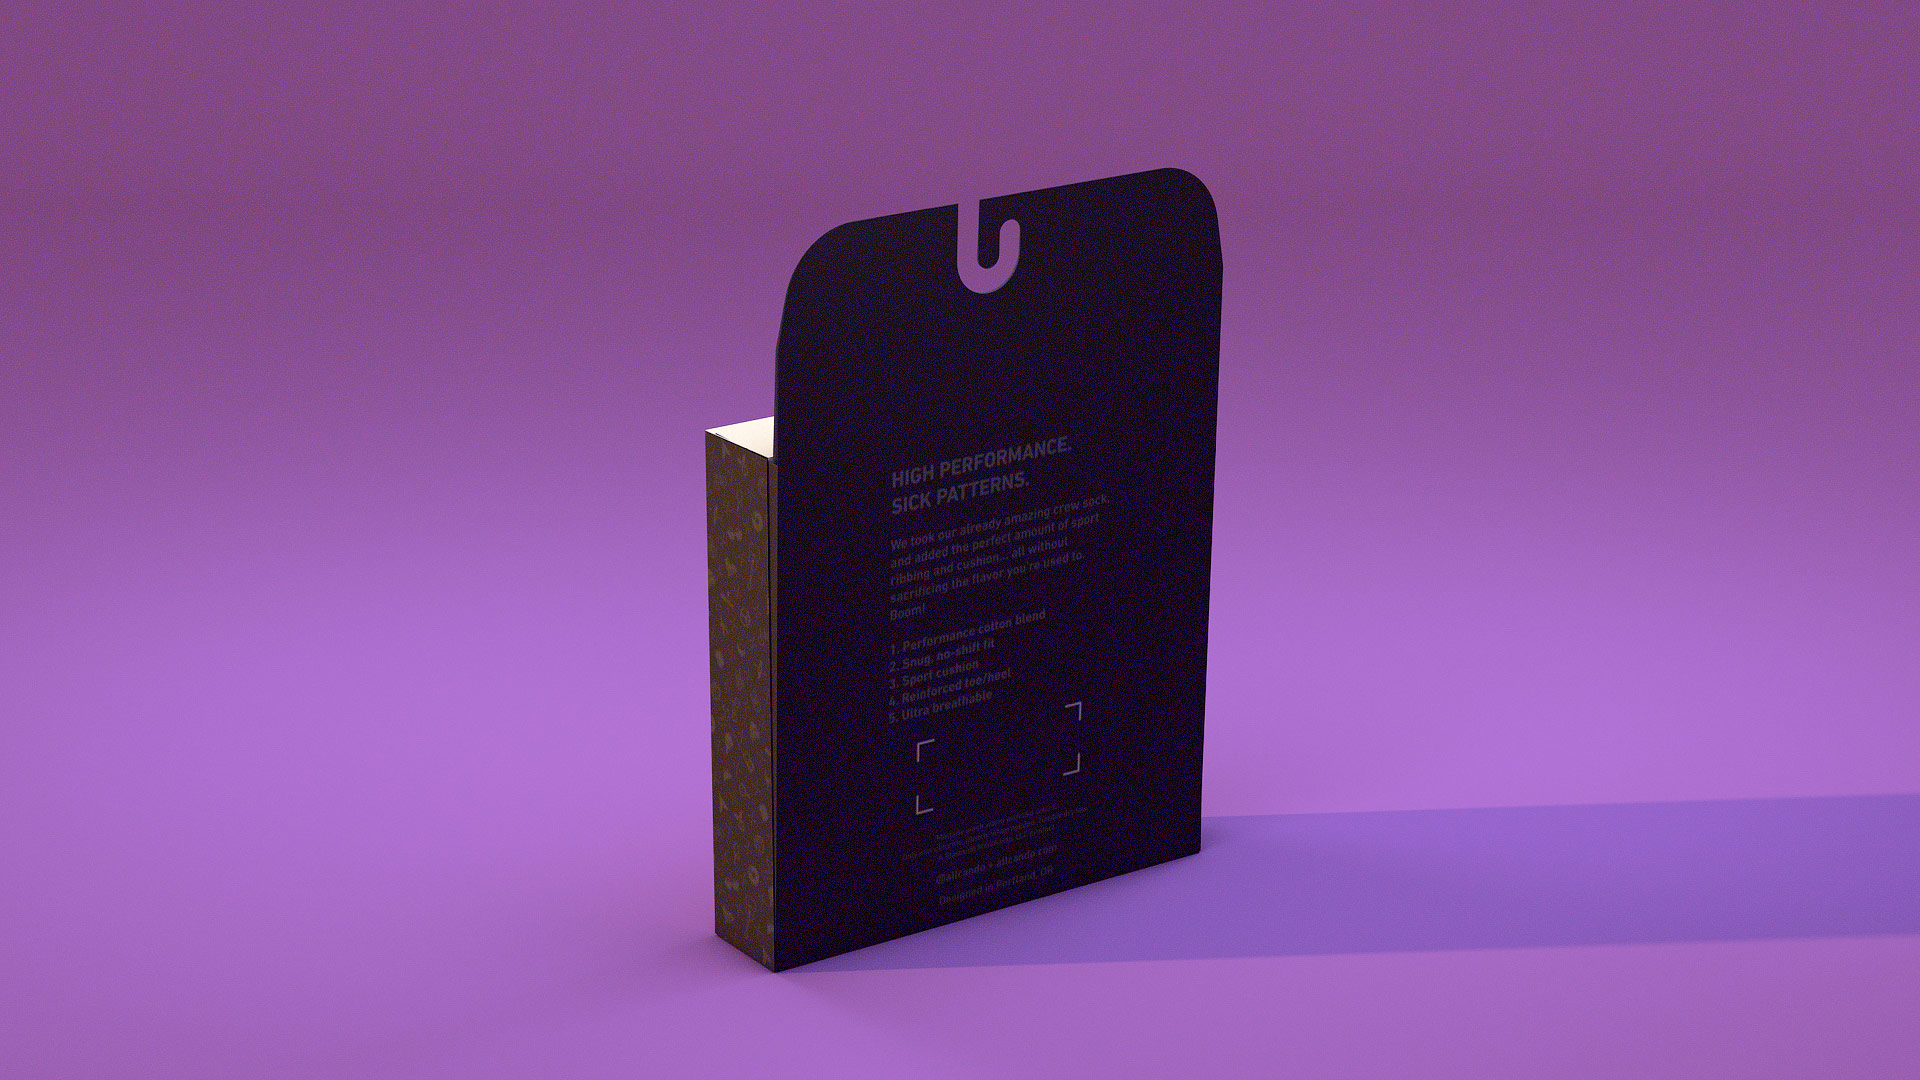 An image of a custom Pair of Thieves package design, placed against a purple background.